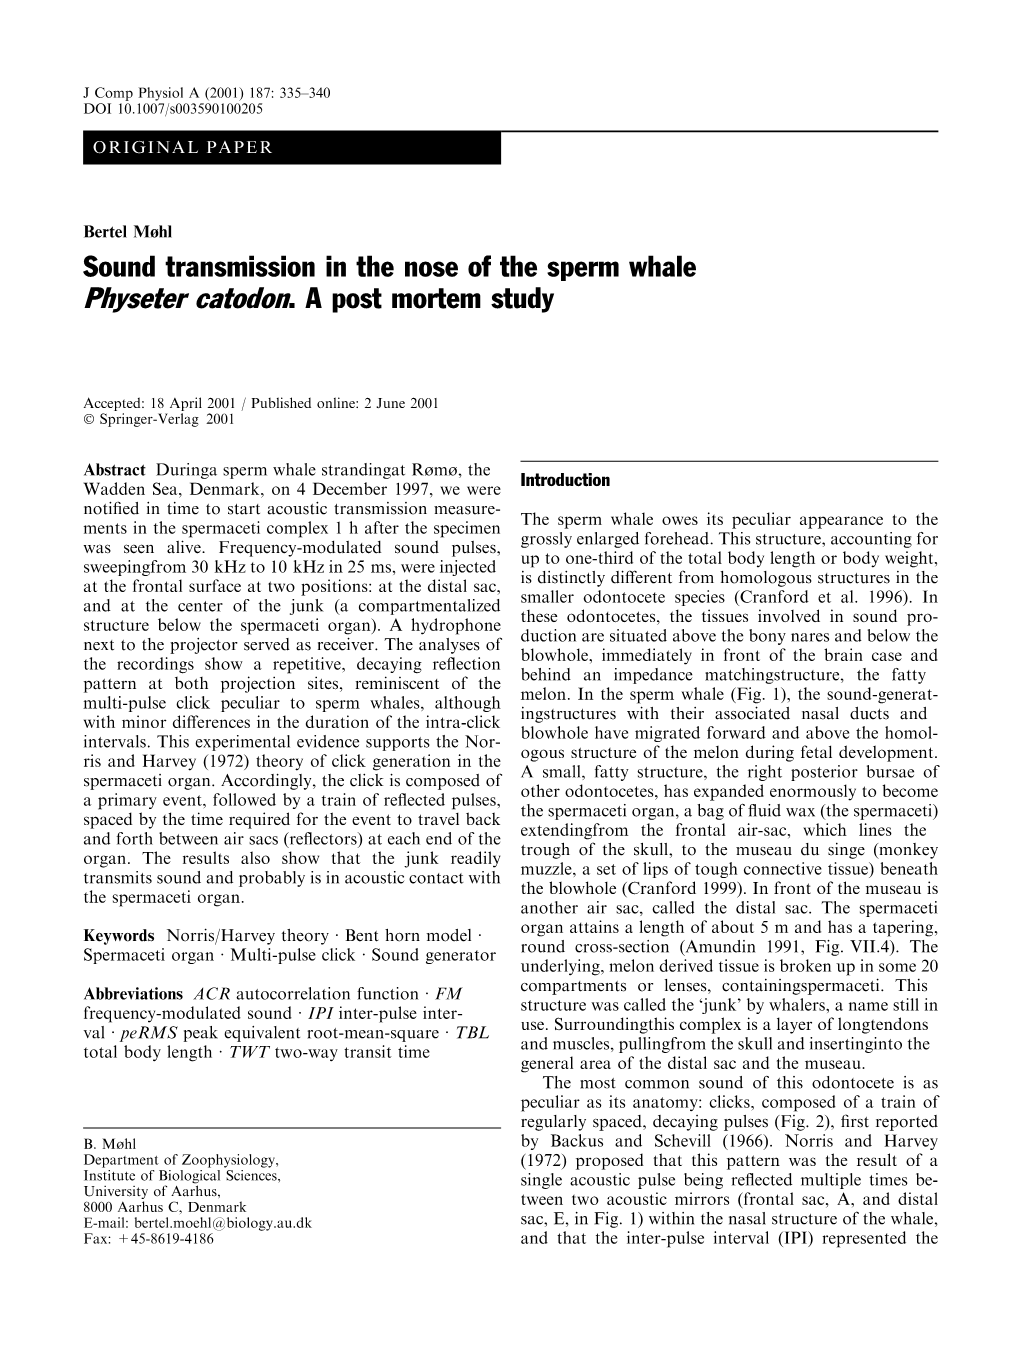 Sound Transmission in the Nose of the Sperm Whale Physeter Catodon. a Post Mortem Study